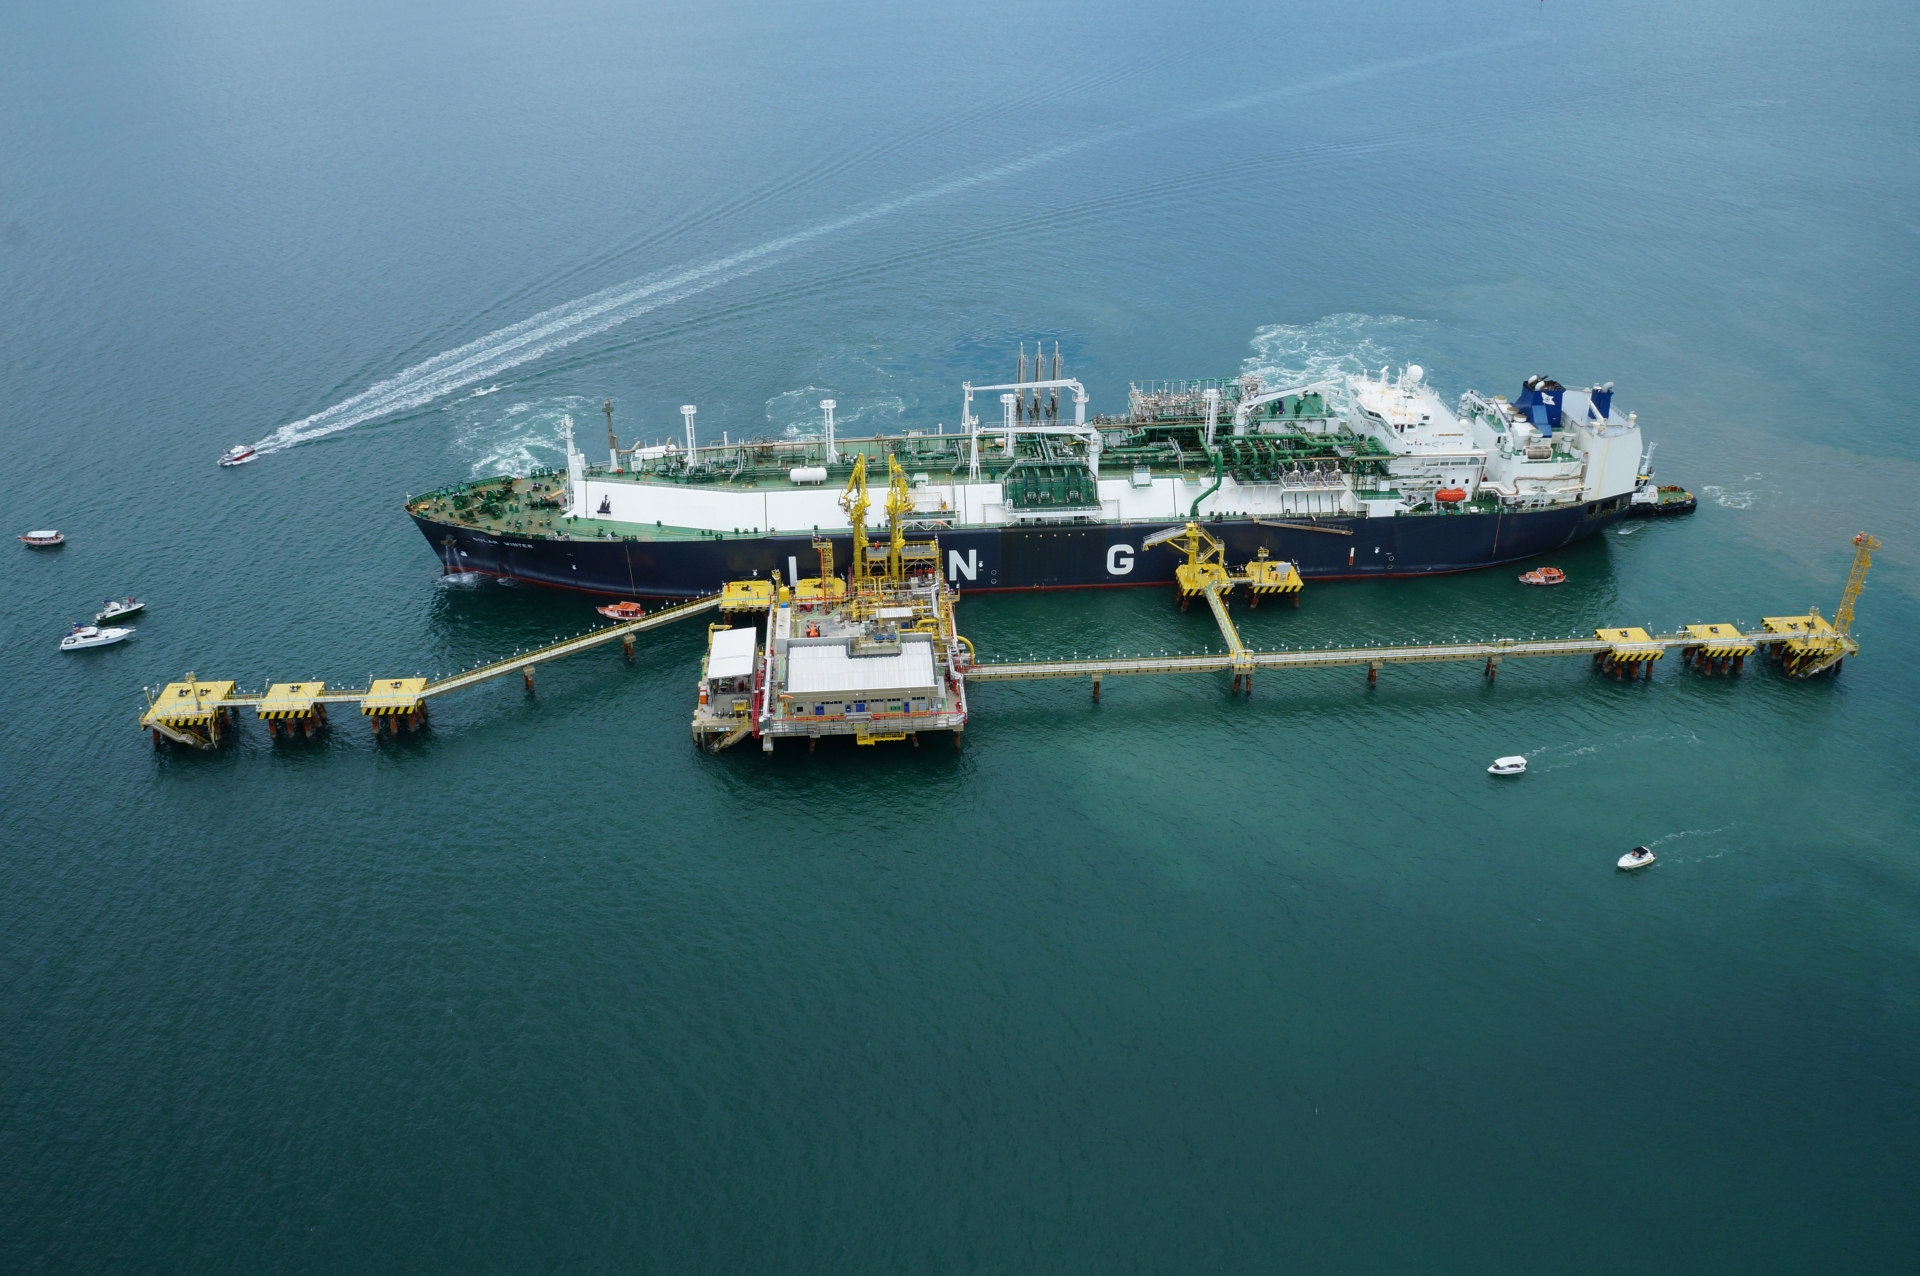 Petrobras has another go at leasing Bahia LNG facilities